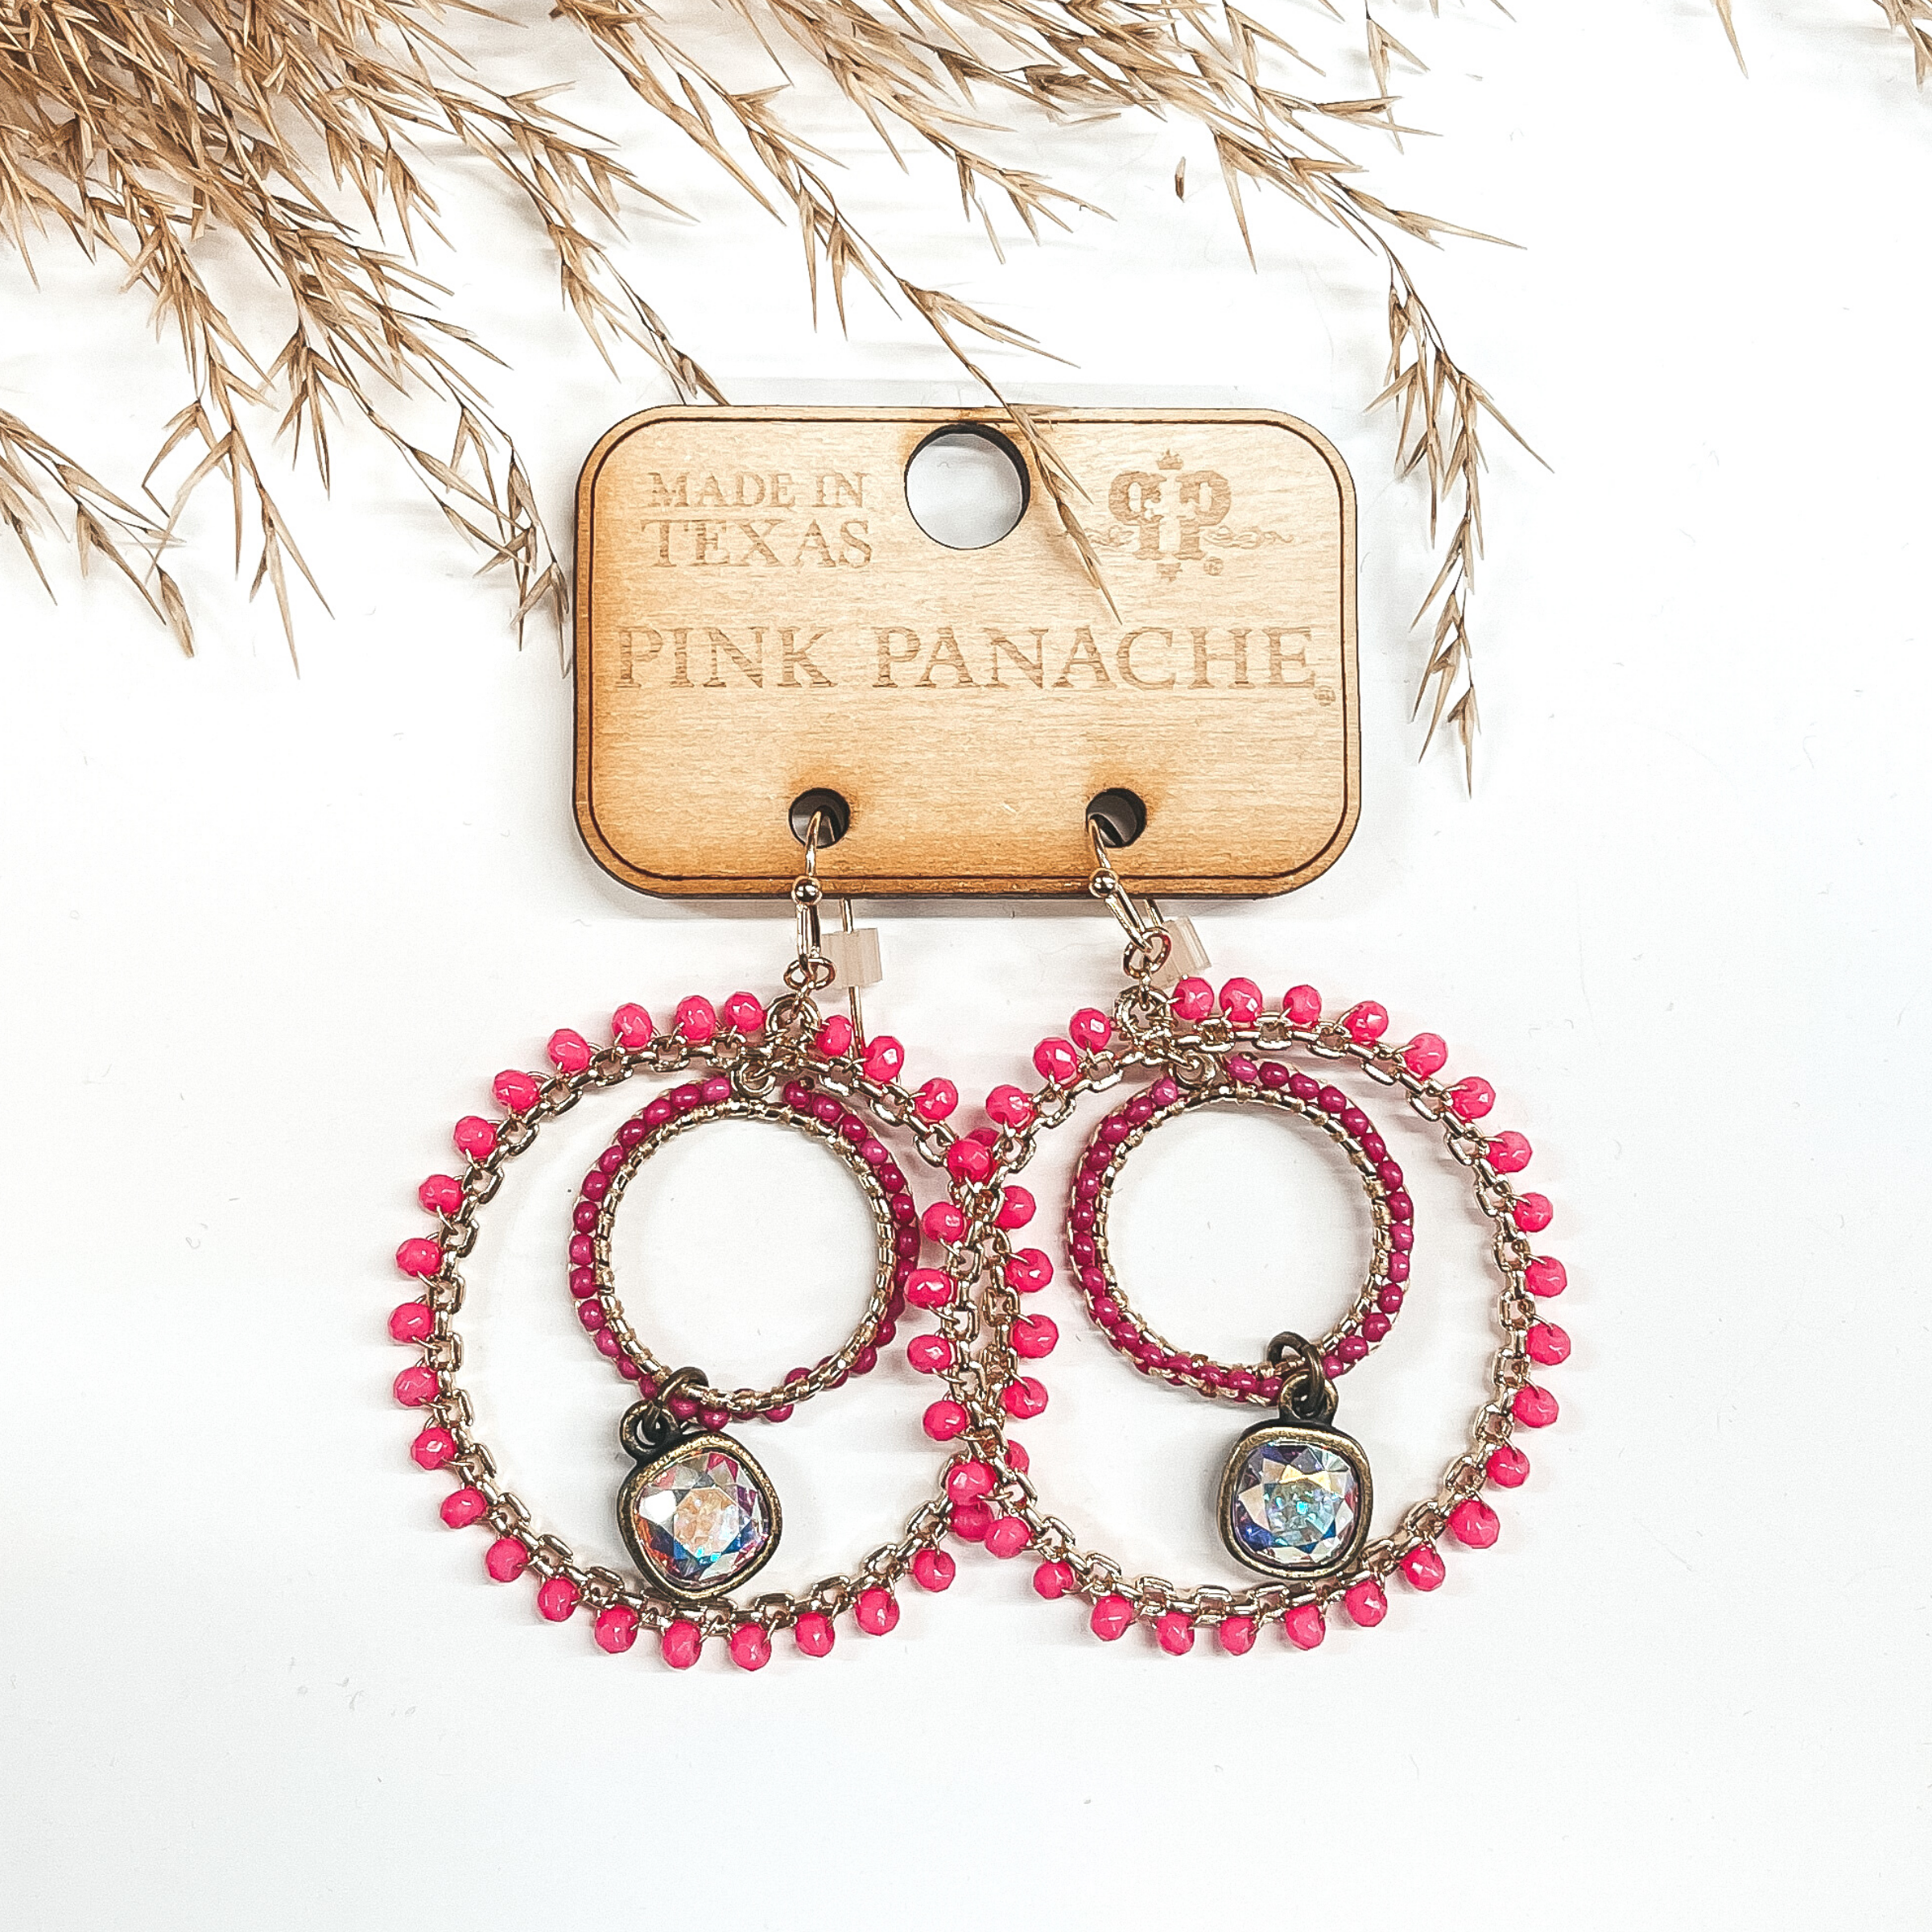 These are gold double hoop earrings with hot pink beads around on the outside hoop. The inside hoop has  smaller fuchsia beads with a hanging ab crystal in the center. Taken on a white background with a brown plant in the back as decor.